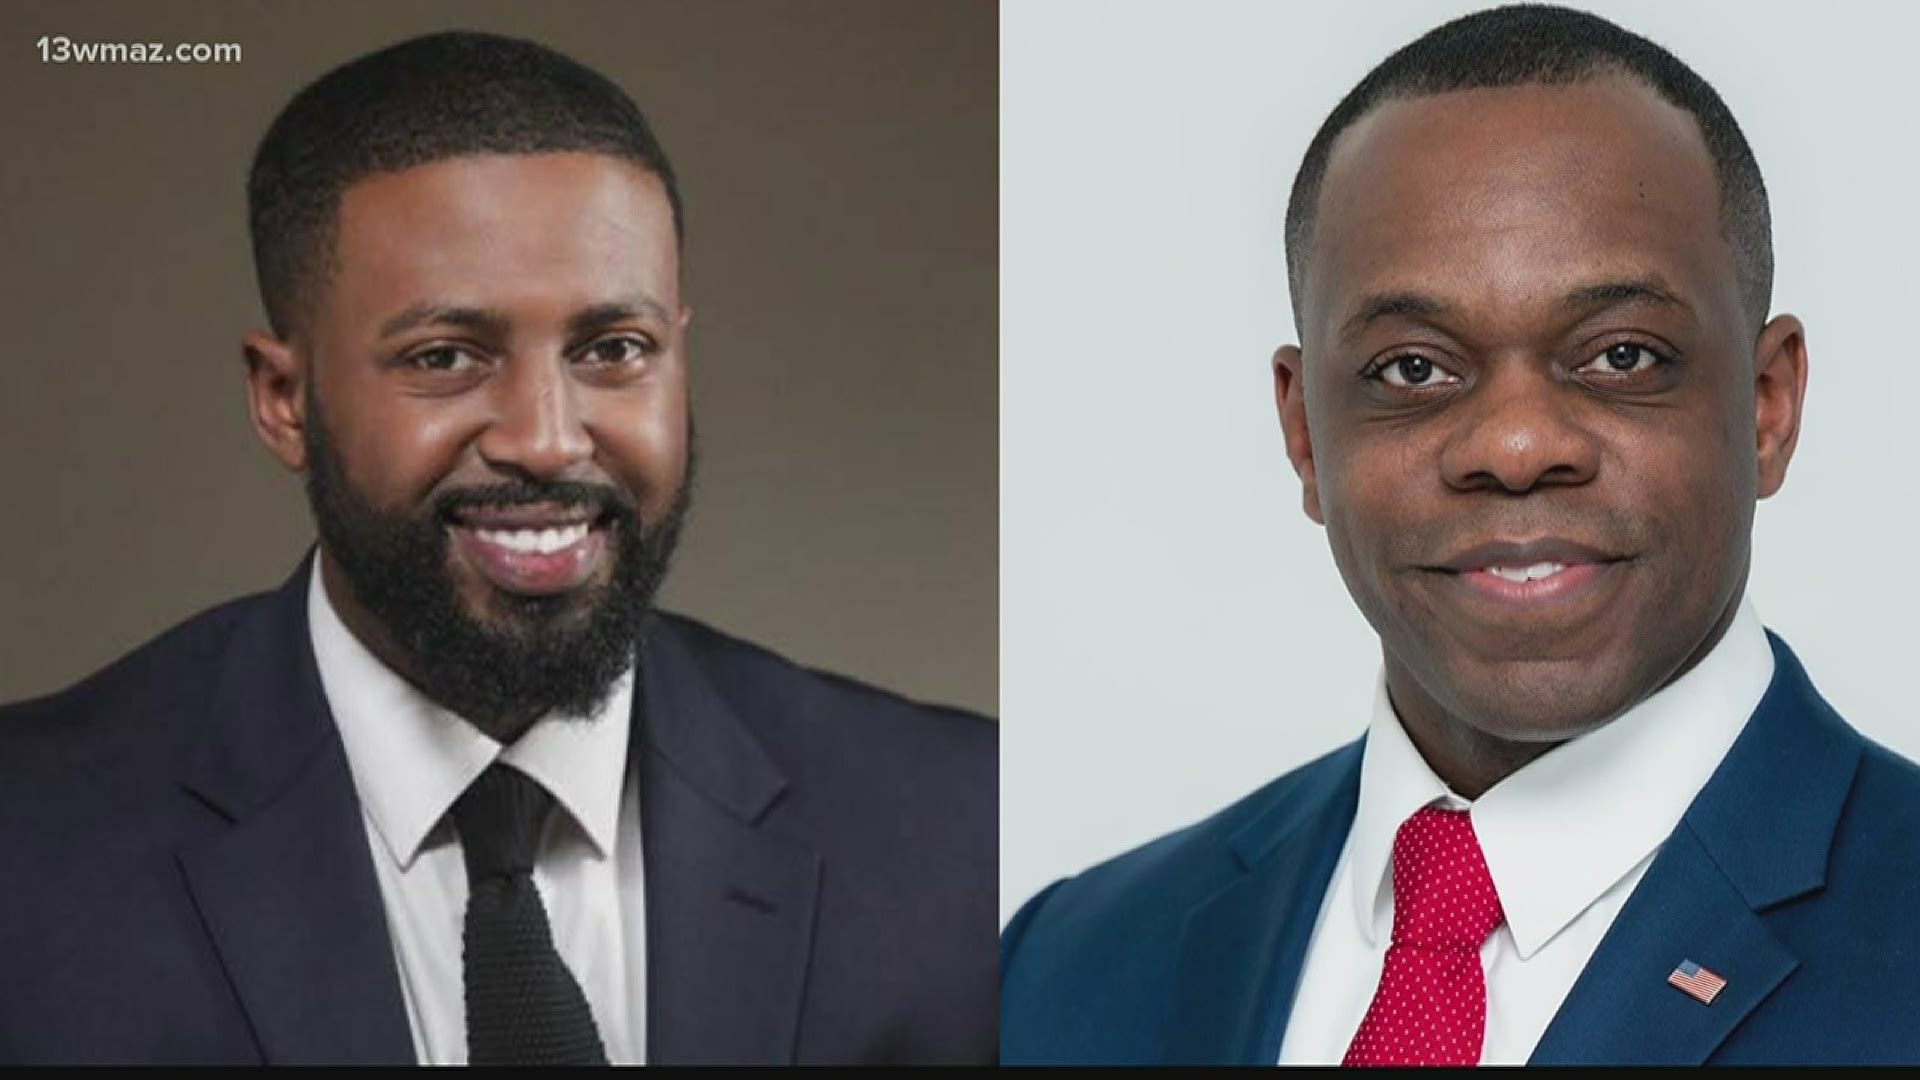 Georgia's general primary election is less than a month away. Here are the two men running for the Macon-Bibb Commission District 2 seat.